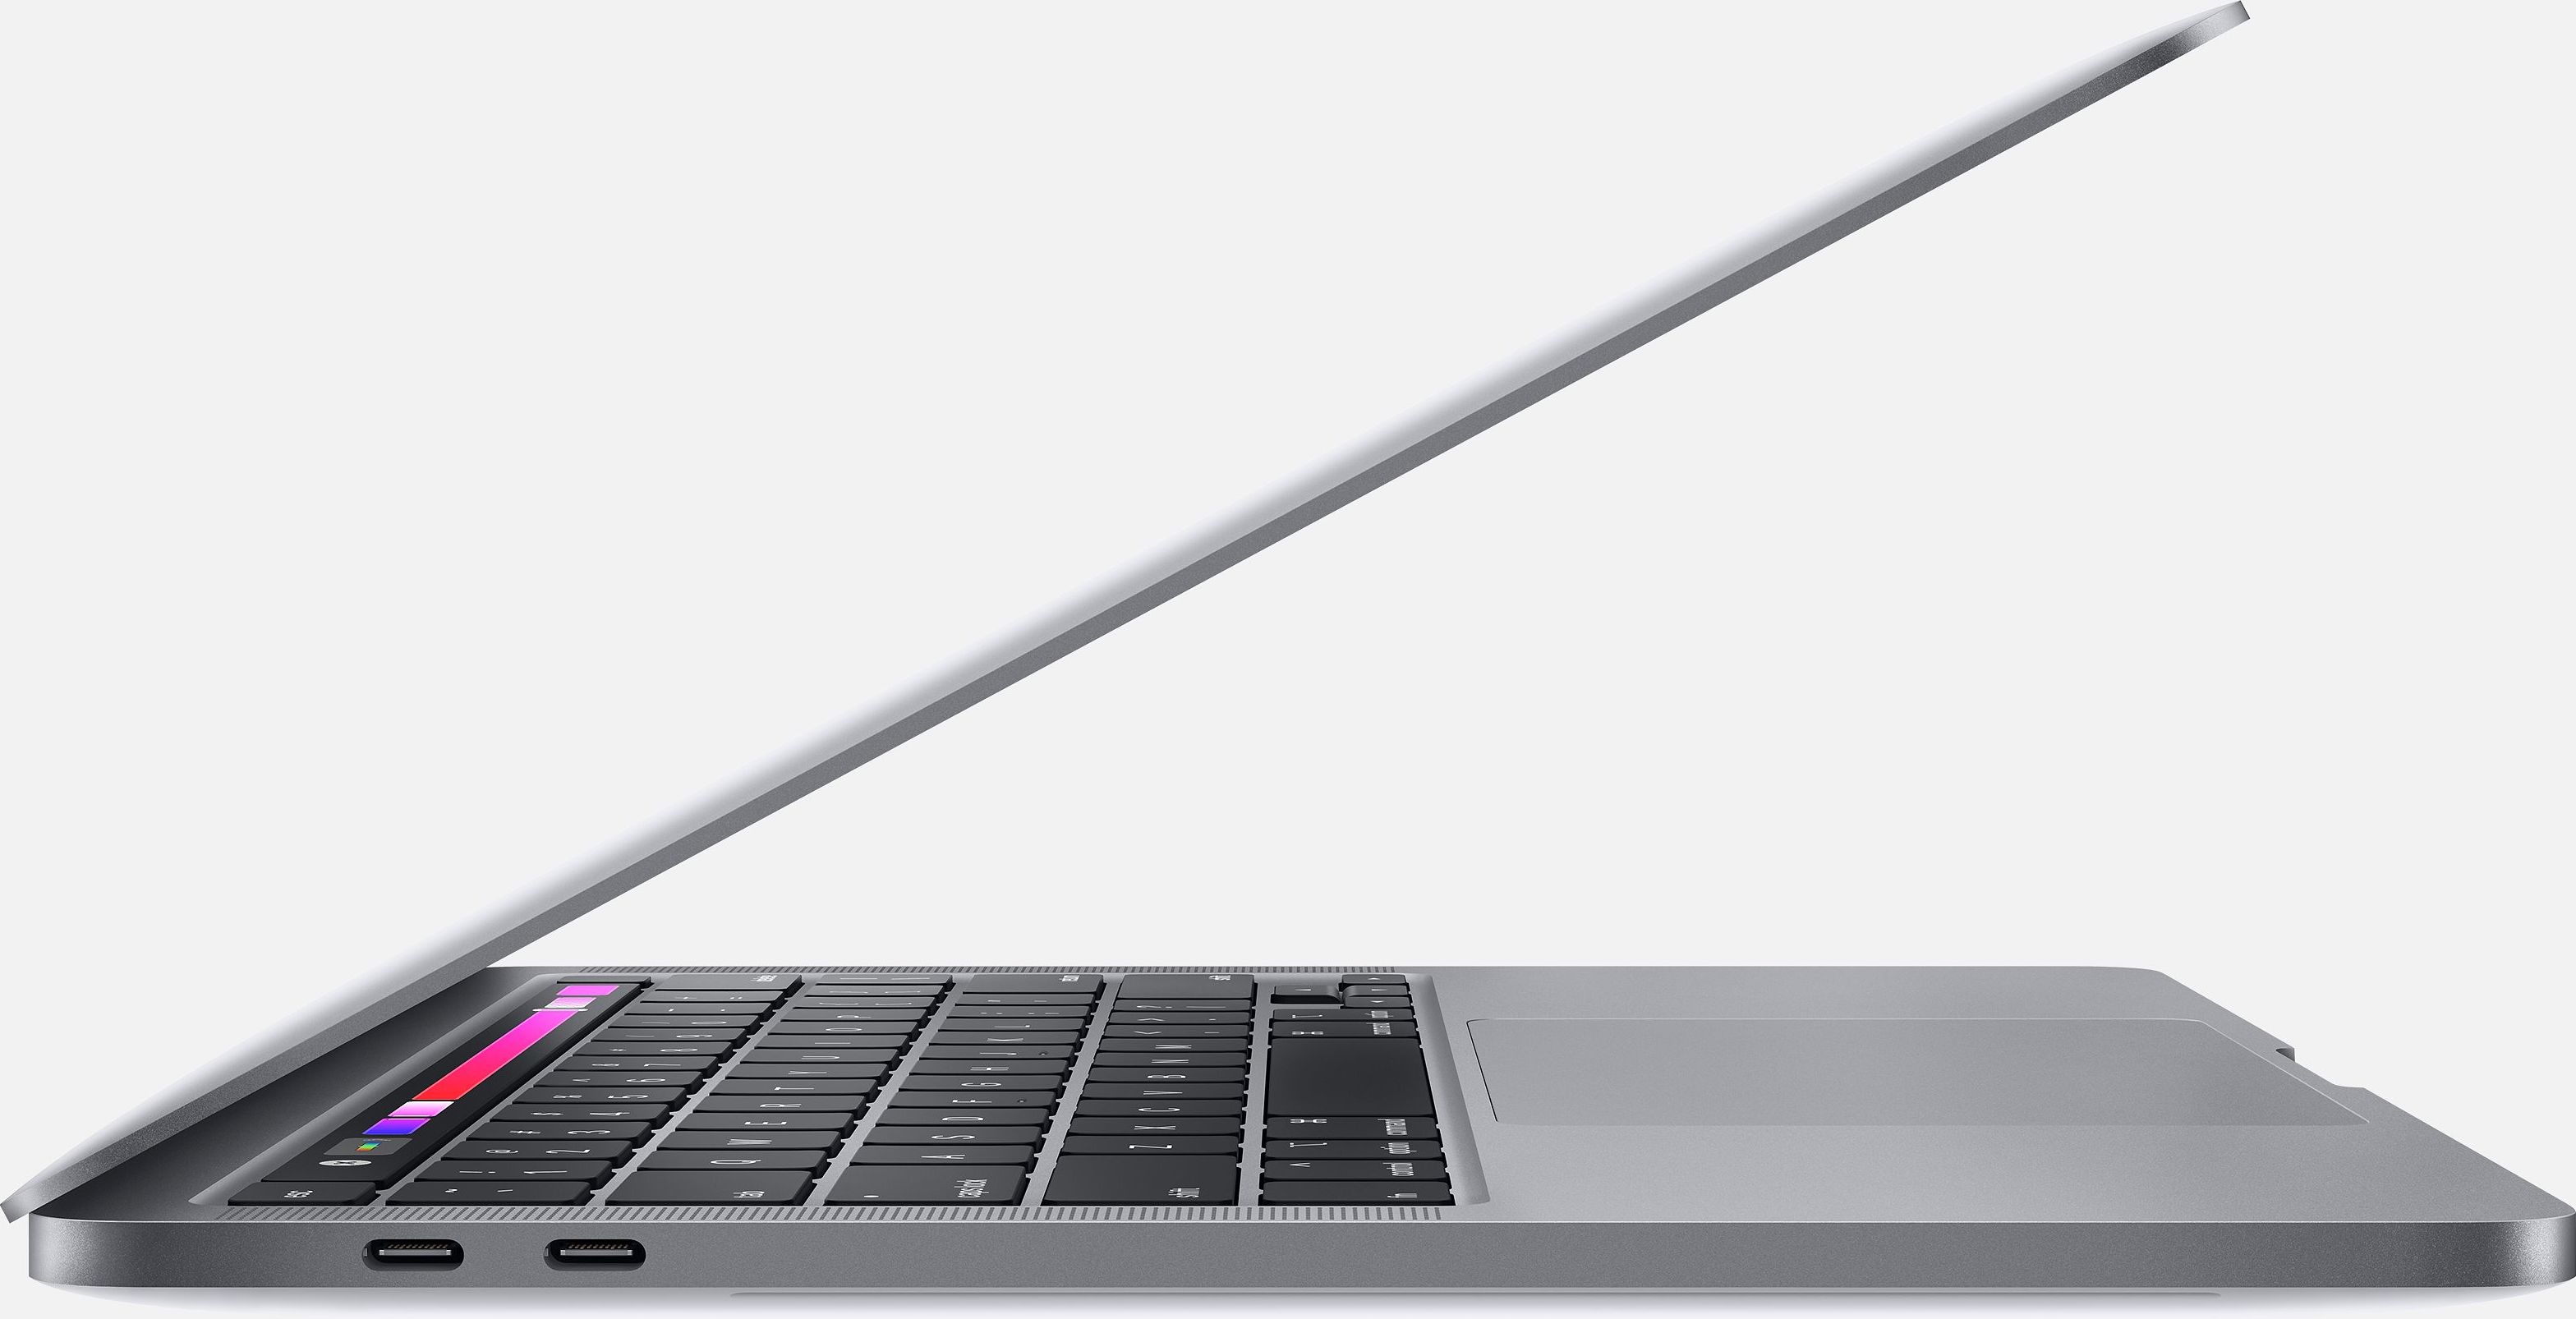 Apple’s new MacBook Pro 13″ debuted at the ‘One More Thing’ event